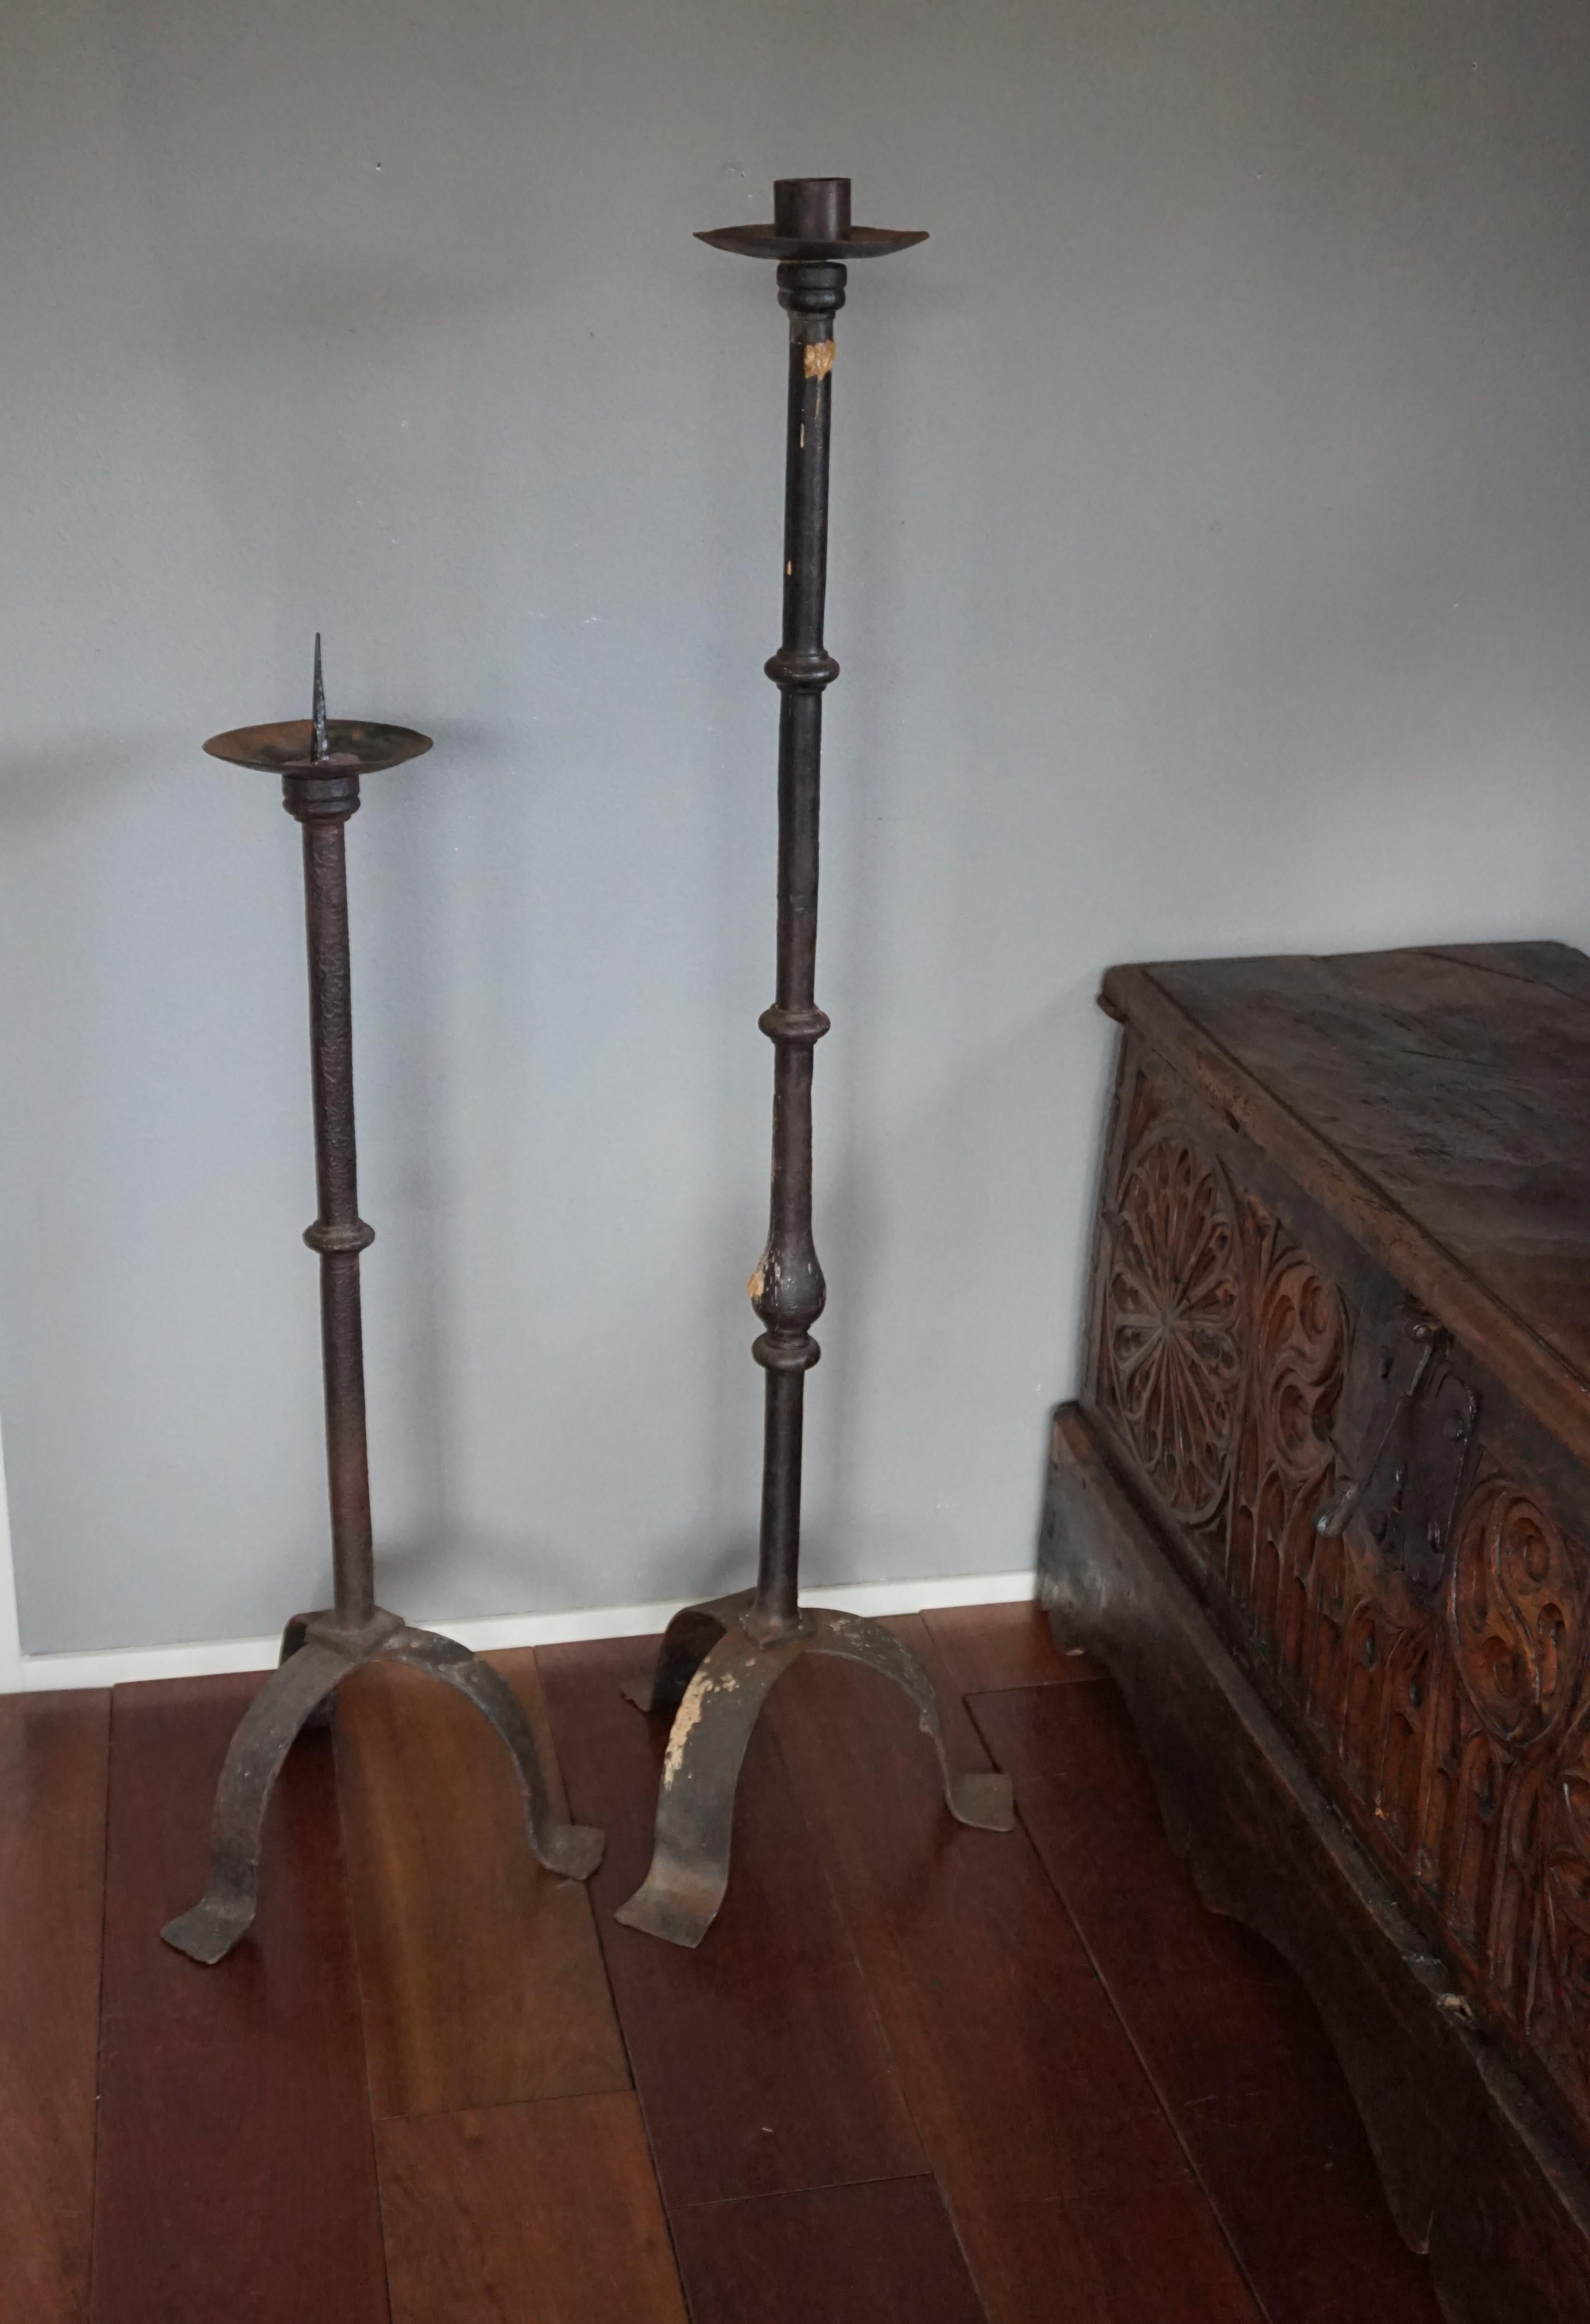 Handcrafted and highly decorative pair of antique floor candlesticks.

These rare and hand forged, 19th century candlesticks will look particularly marvelous in a mediëval or Gothic style interior. They aged beautifully which has given them their